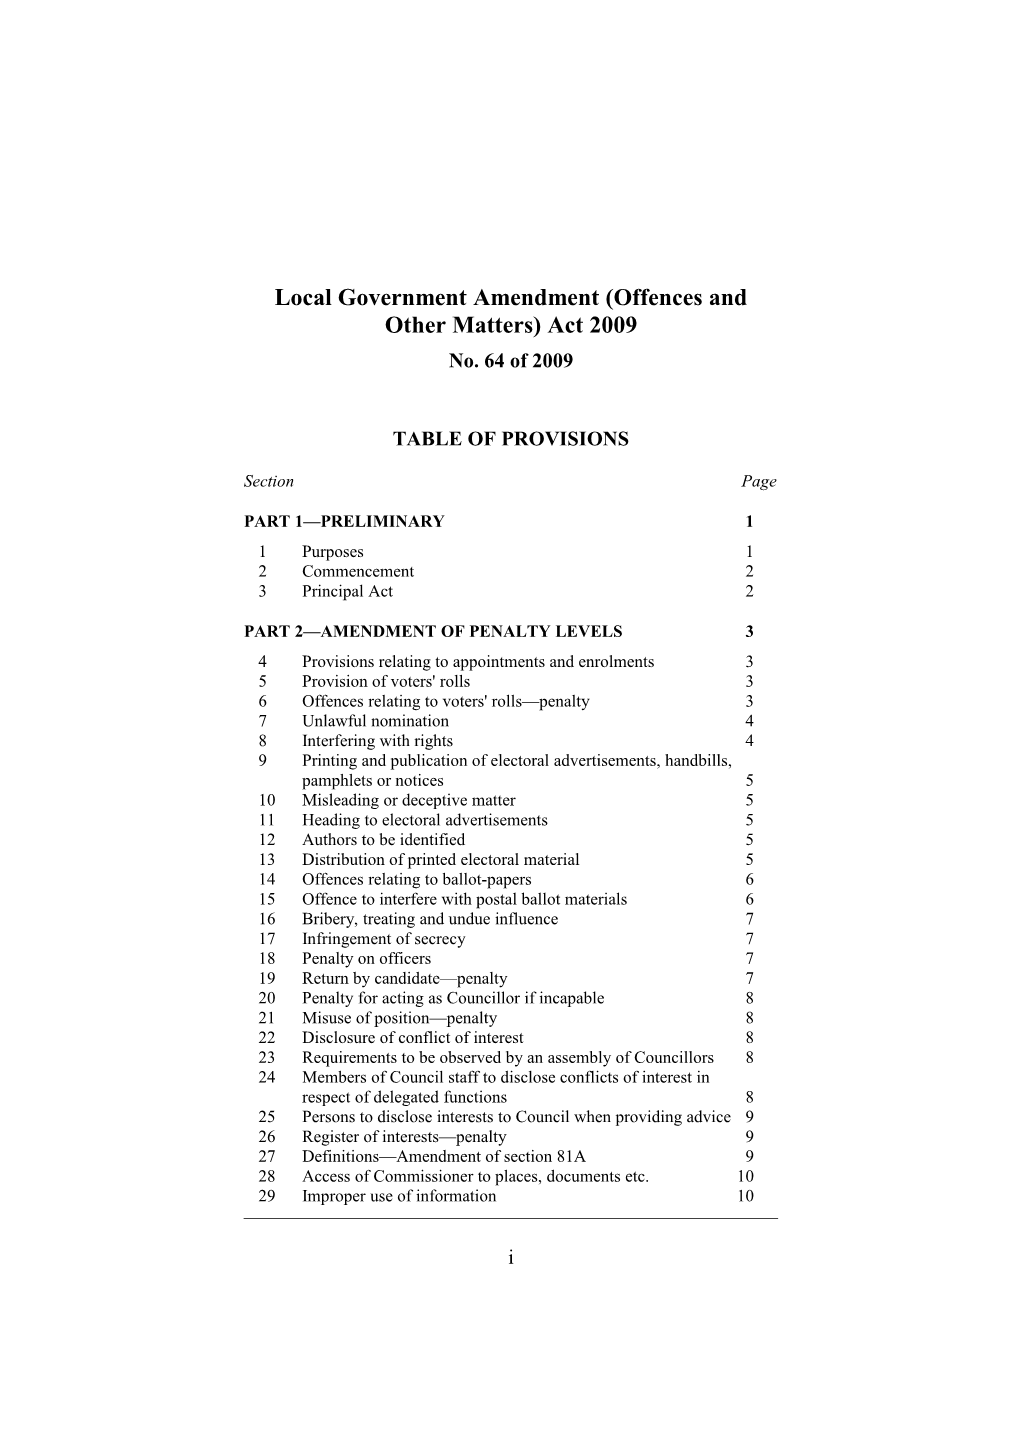 Local Government Amendment (Offences and Other Matters) Act 2009